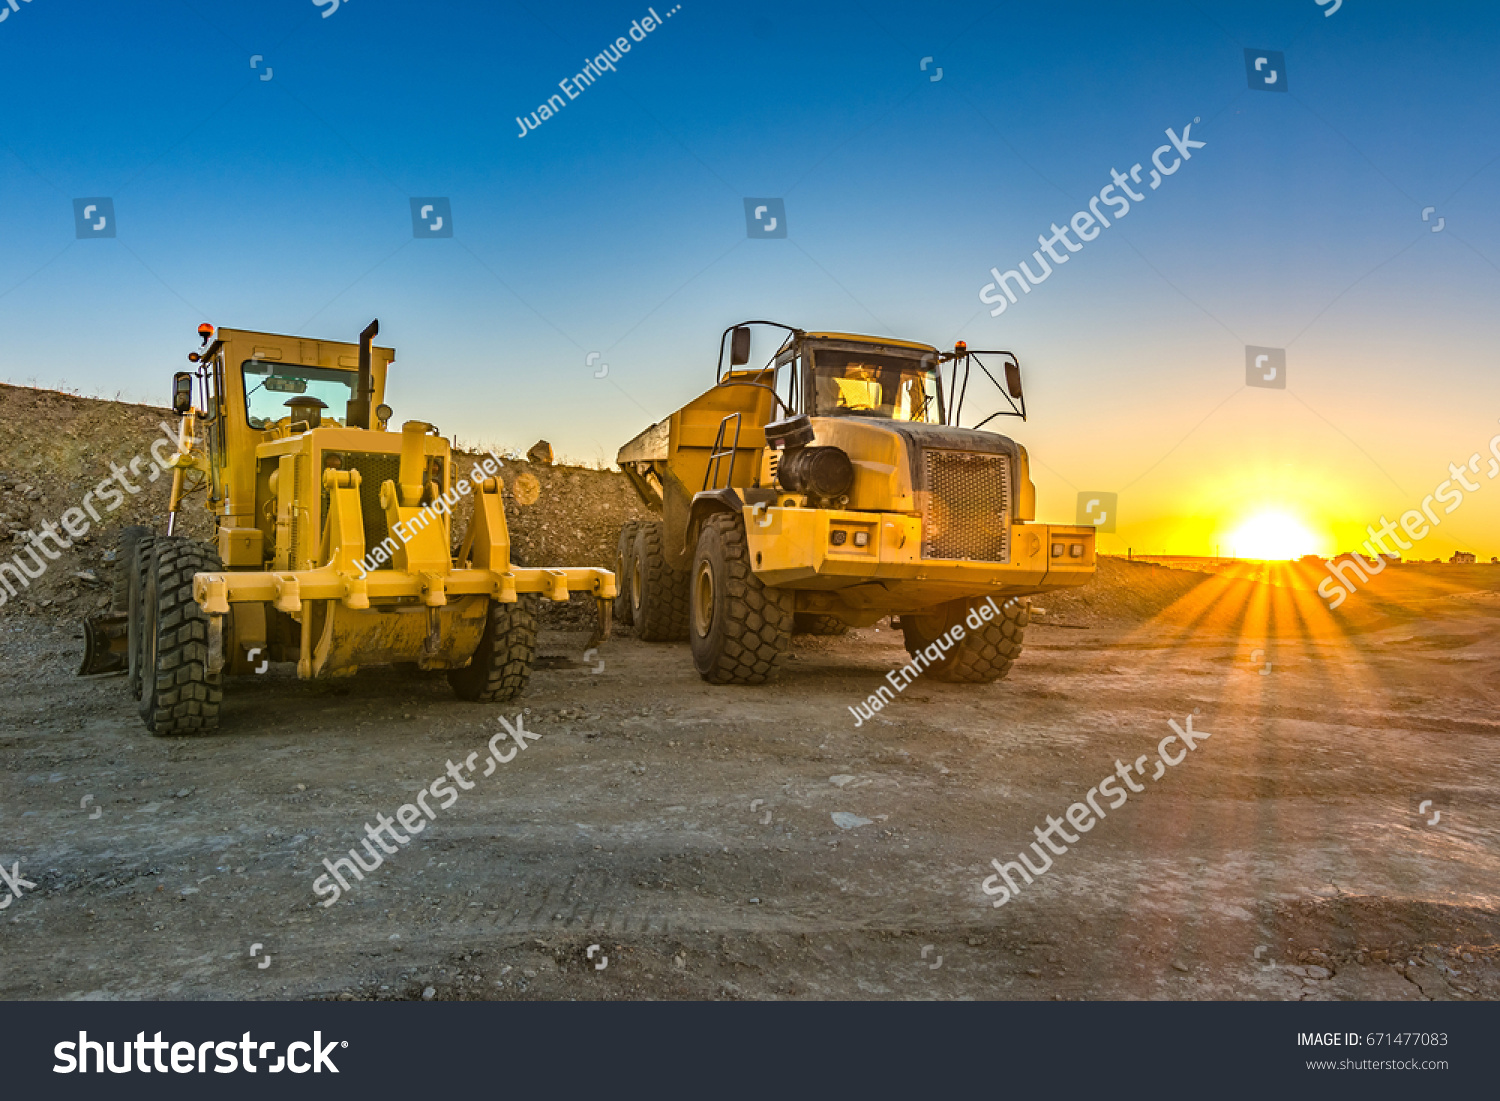 Excavator and trucks working on the excavation works of a road, moving rock and earth #671477083